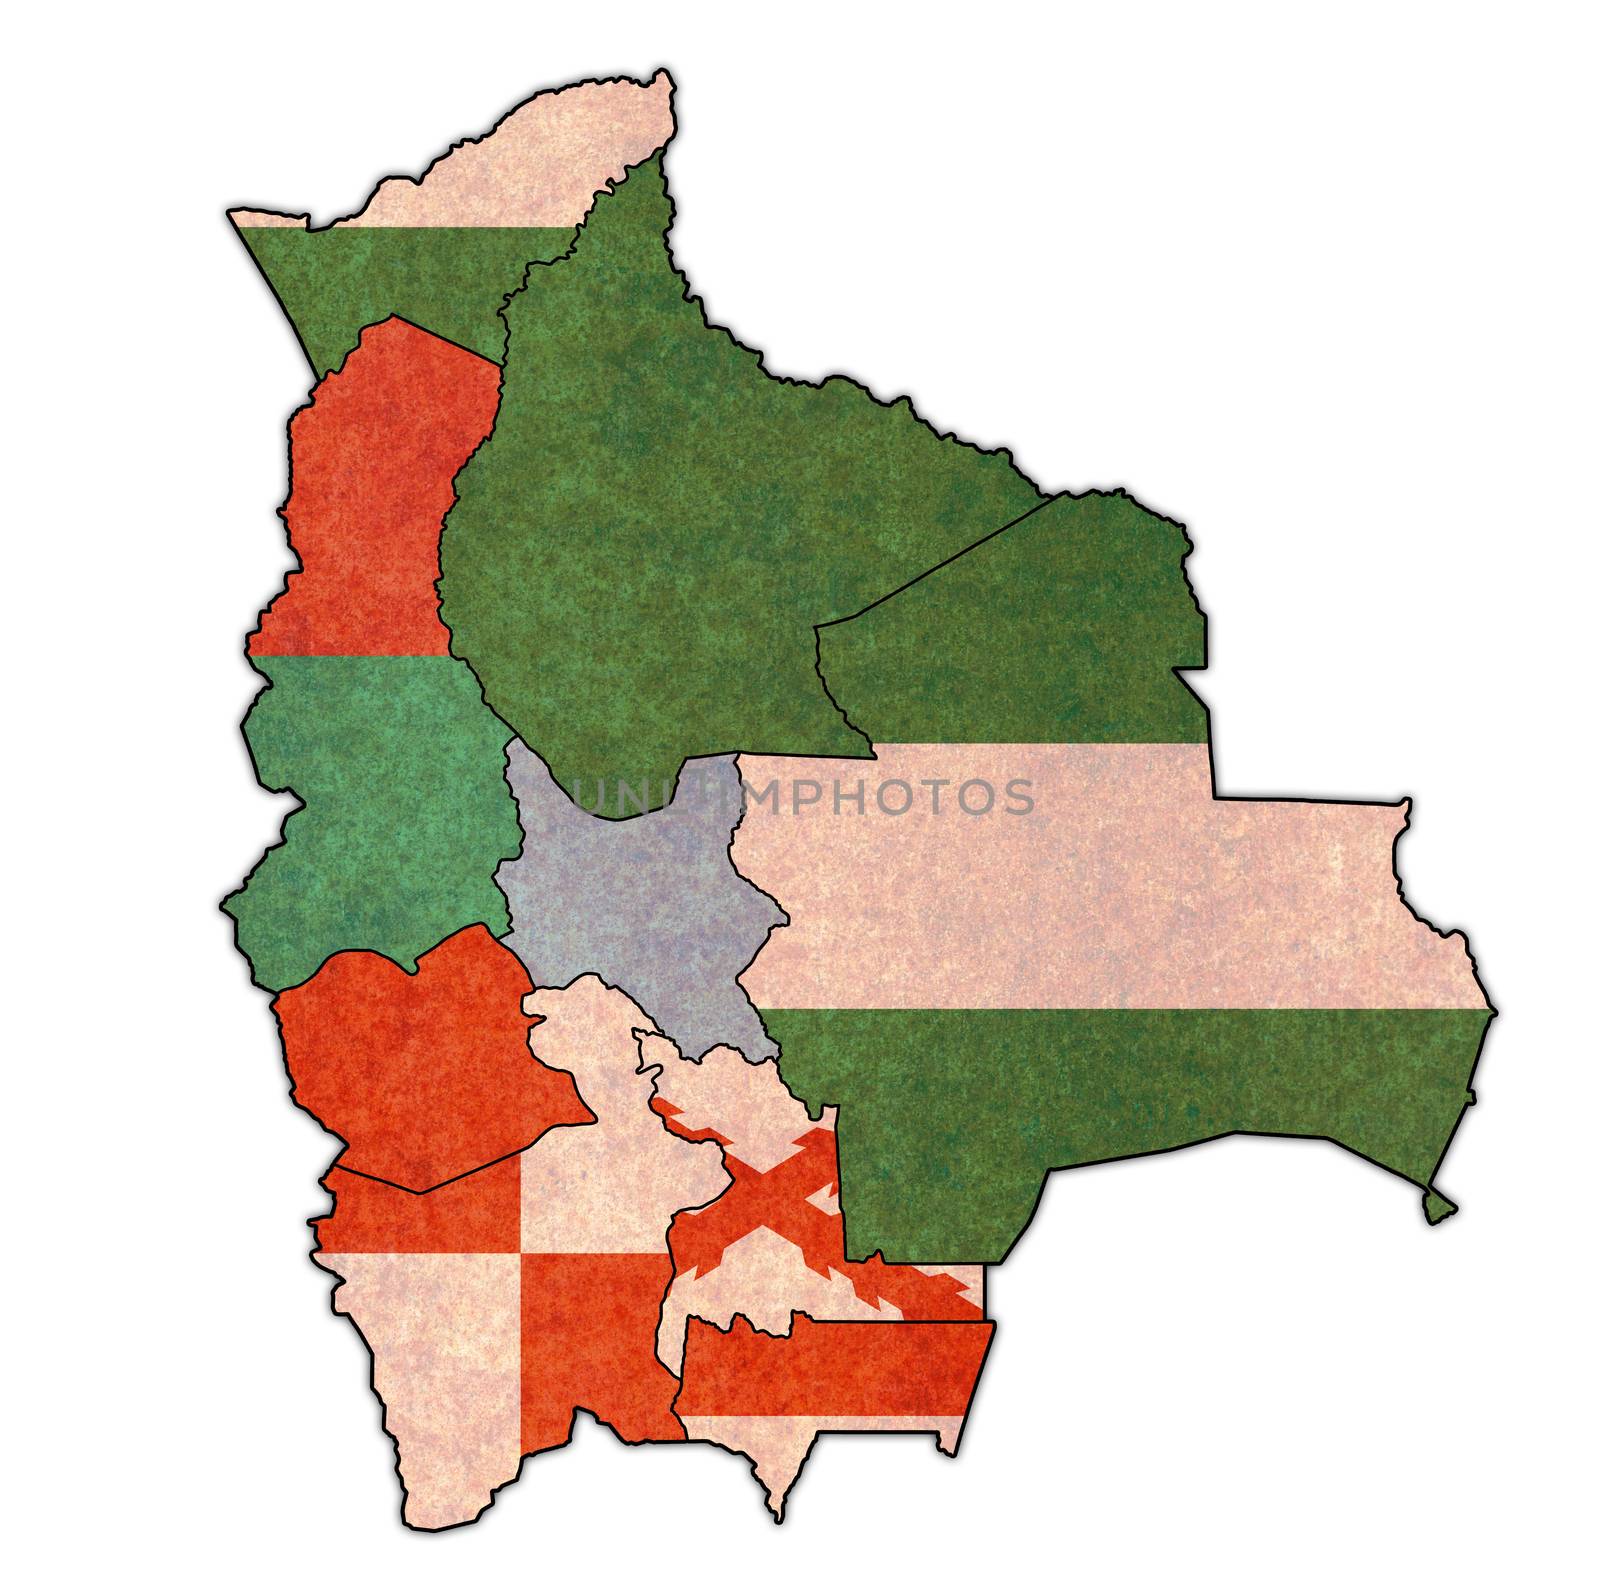 territory and flags regions on map with administrative divisions and borders of Bolivia with clipping path